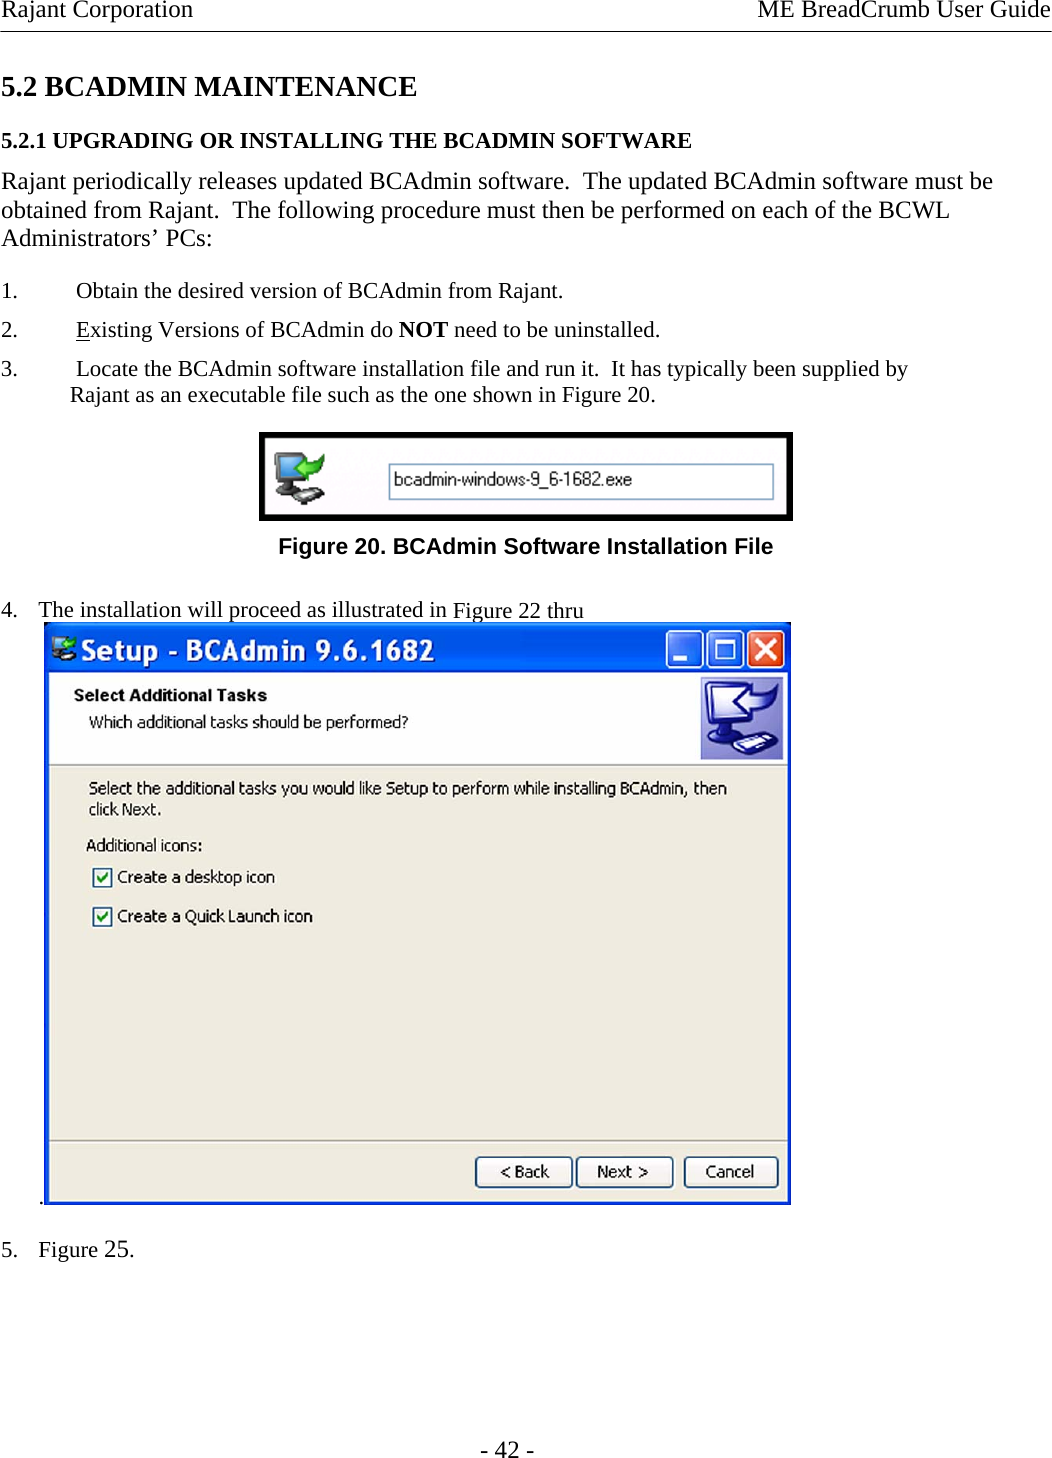 Rajant Corporation    ME BreadCrumb User Guide  5.2 BCADMIN MAINTENANCE 5.2.1 UPGRADING OR INSTALLING THE BCADMIN SOFTWARE Rajant periodically releases updated BCAdmin software.  The updated BCAdmin software must be obtained from Rajant.  The following procedure must then be performed on each of the BCWL Administrators’ PCs: 1. Obtain the desired version of BCAdmin from Rajant. - 42 - 2. Existing Versions of BCAdmin do NOT need to be uninstalled. 3. Locate the BCAdmin software installation file and run it.  It has typically been supplied by             Rajant as an executable file such as the one shown in Figure 20.  Figure 20. BCAdmin Software Installation File 4. The installation will proceed as illustrated in Figure 22 thru . 5. Figure 25. 